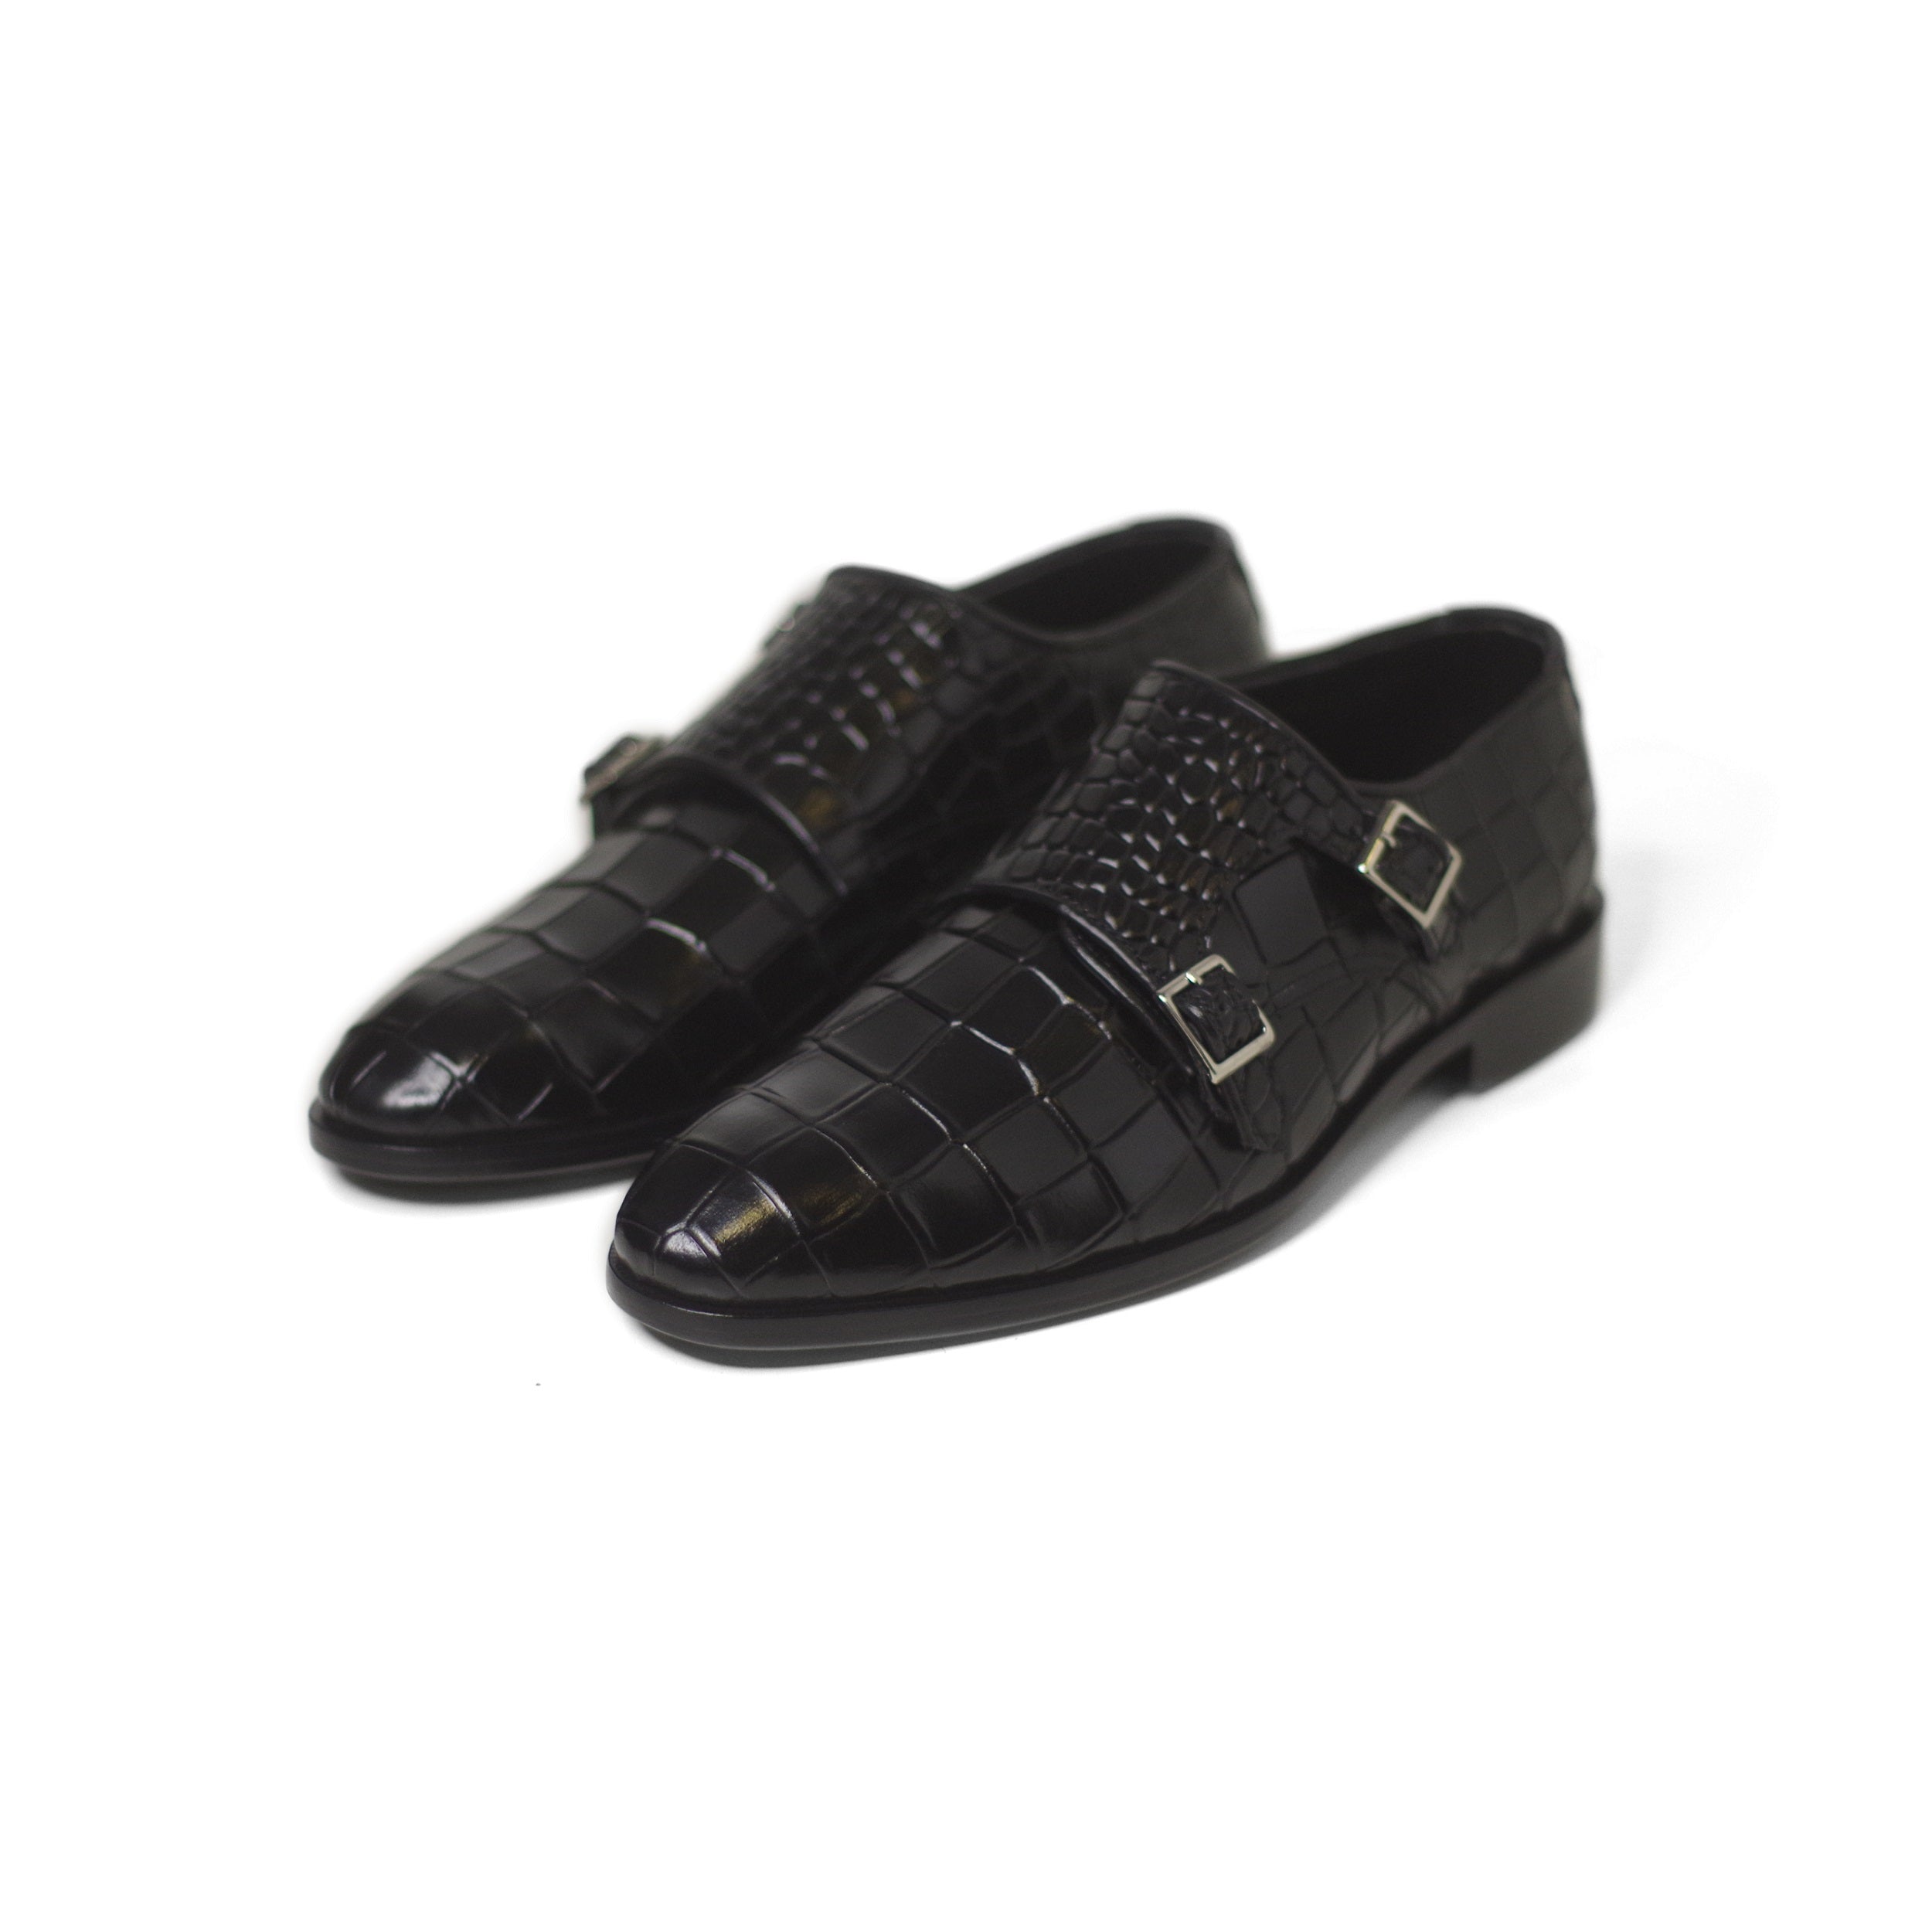 Black Crocodilian Design Shiniest Leather Hand-Crafted Caesar Shoes/Loafers For Men